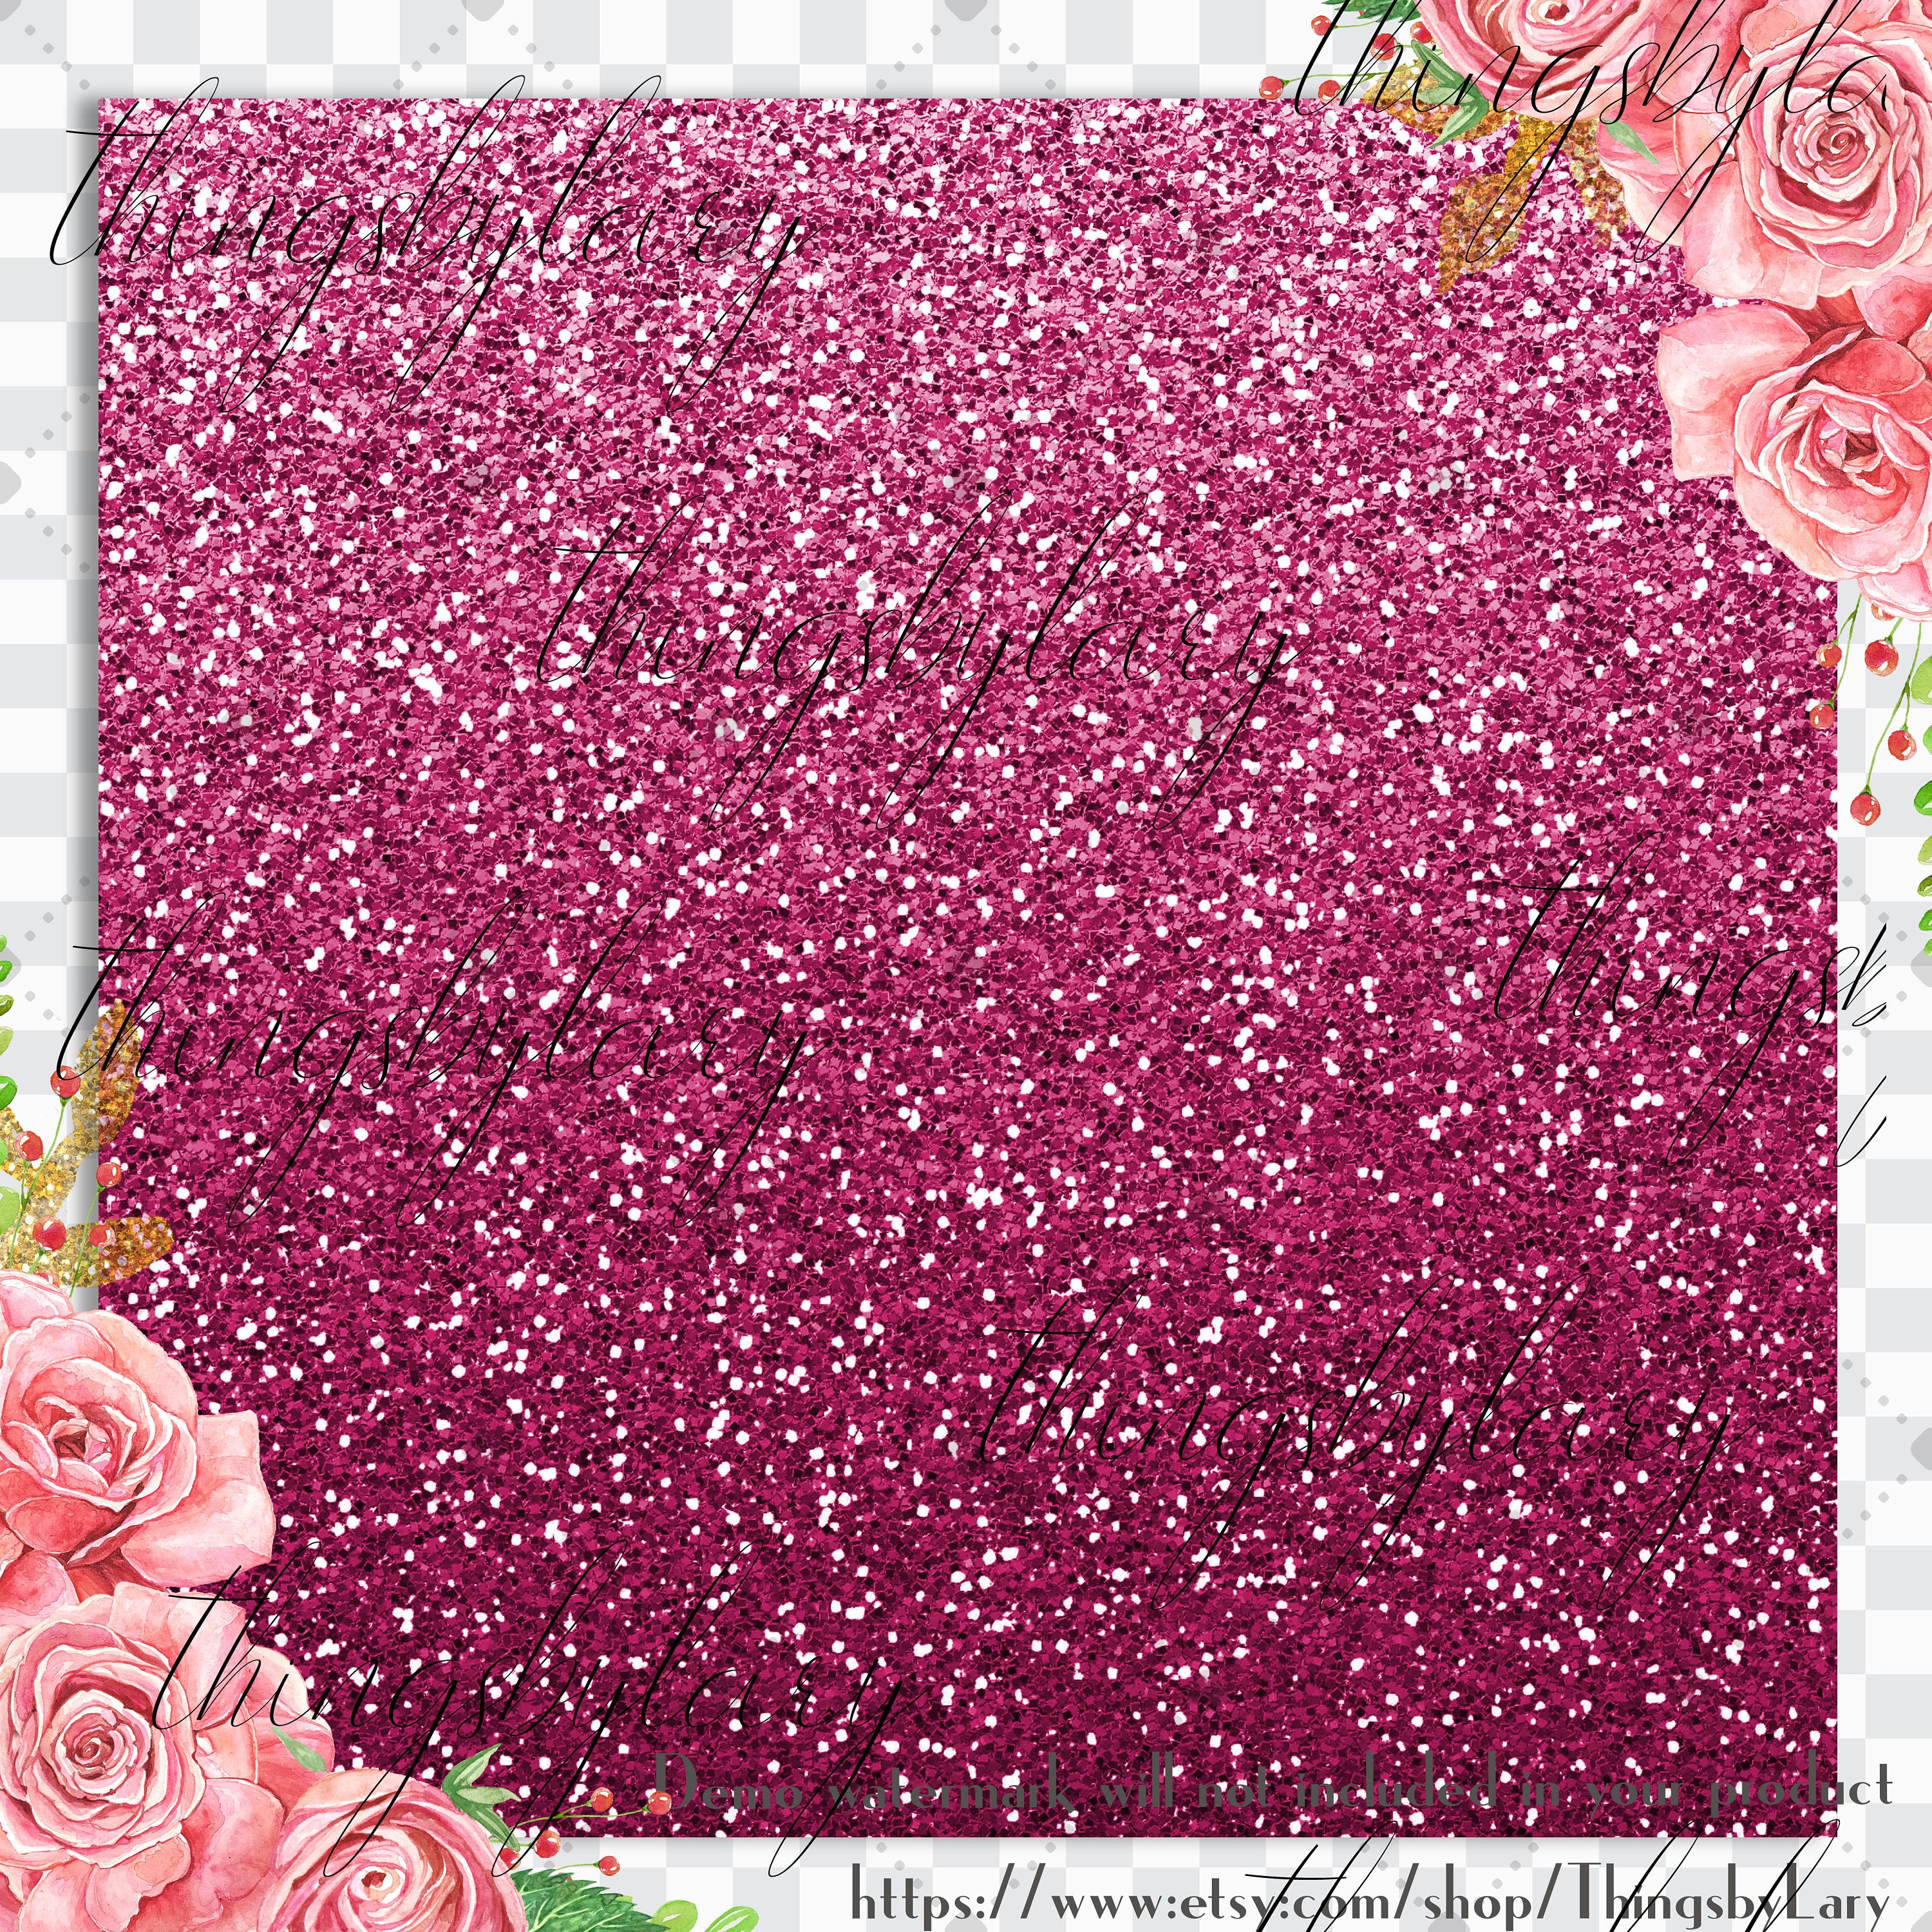 42 Pink Peacock Glitter Papers 12 inch 300 Dpi Planner Paper Commercial Use Scrapbook Paper Digital Glitter, Luxury Pink Paper Glitter Paper